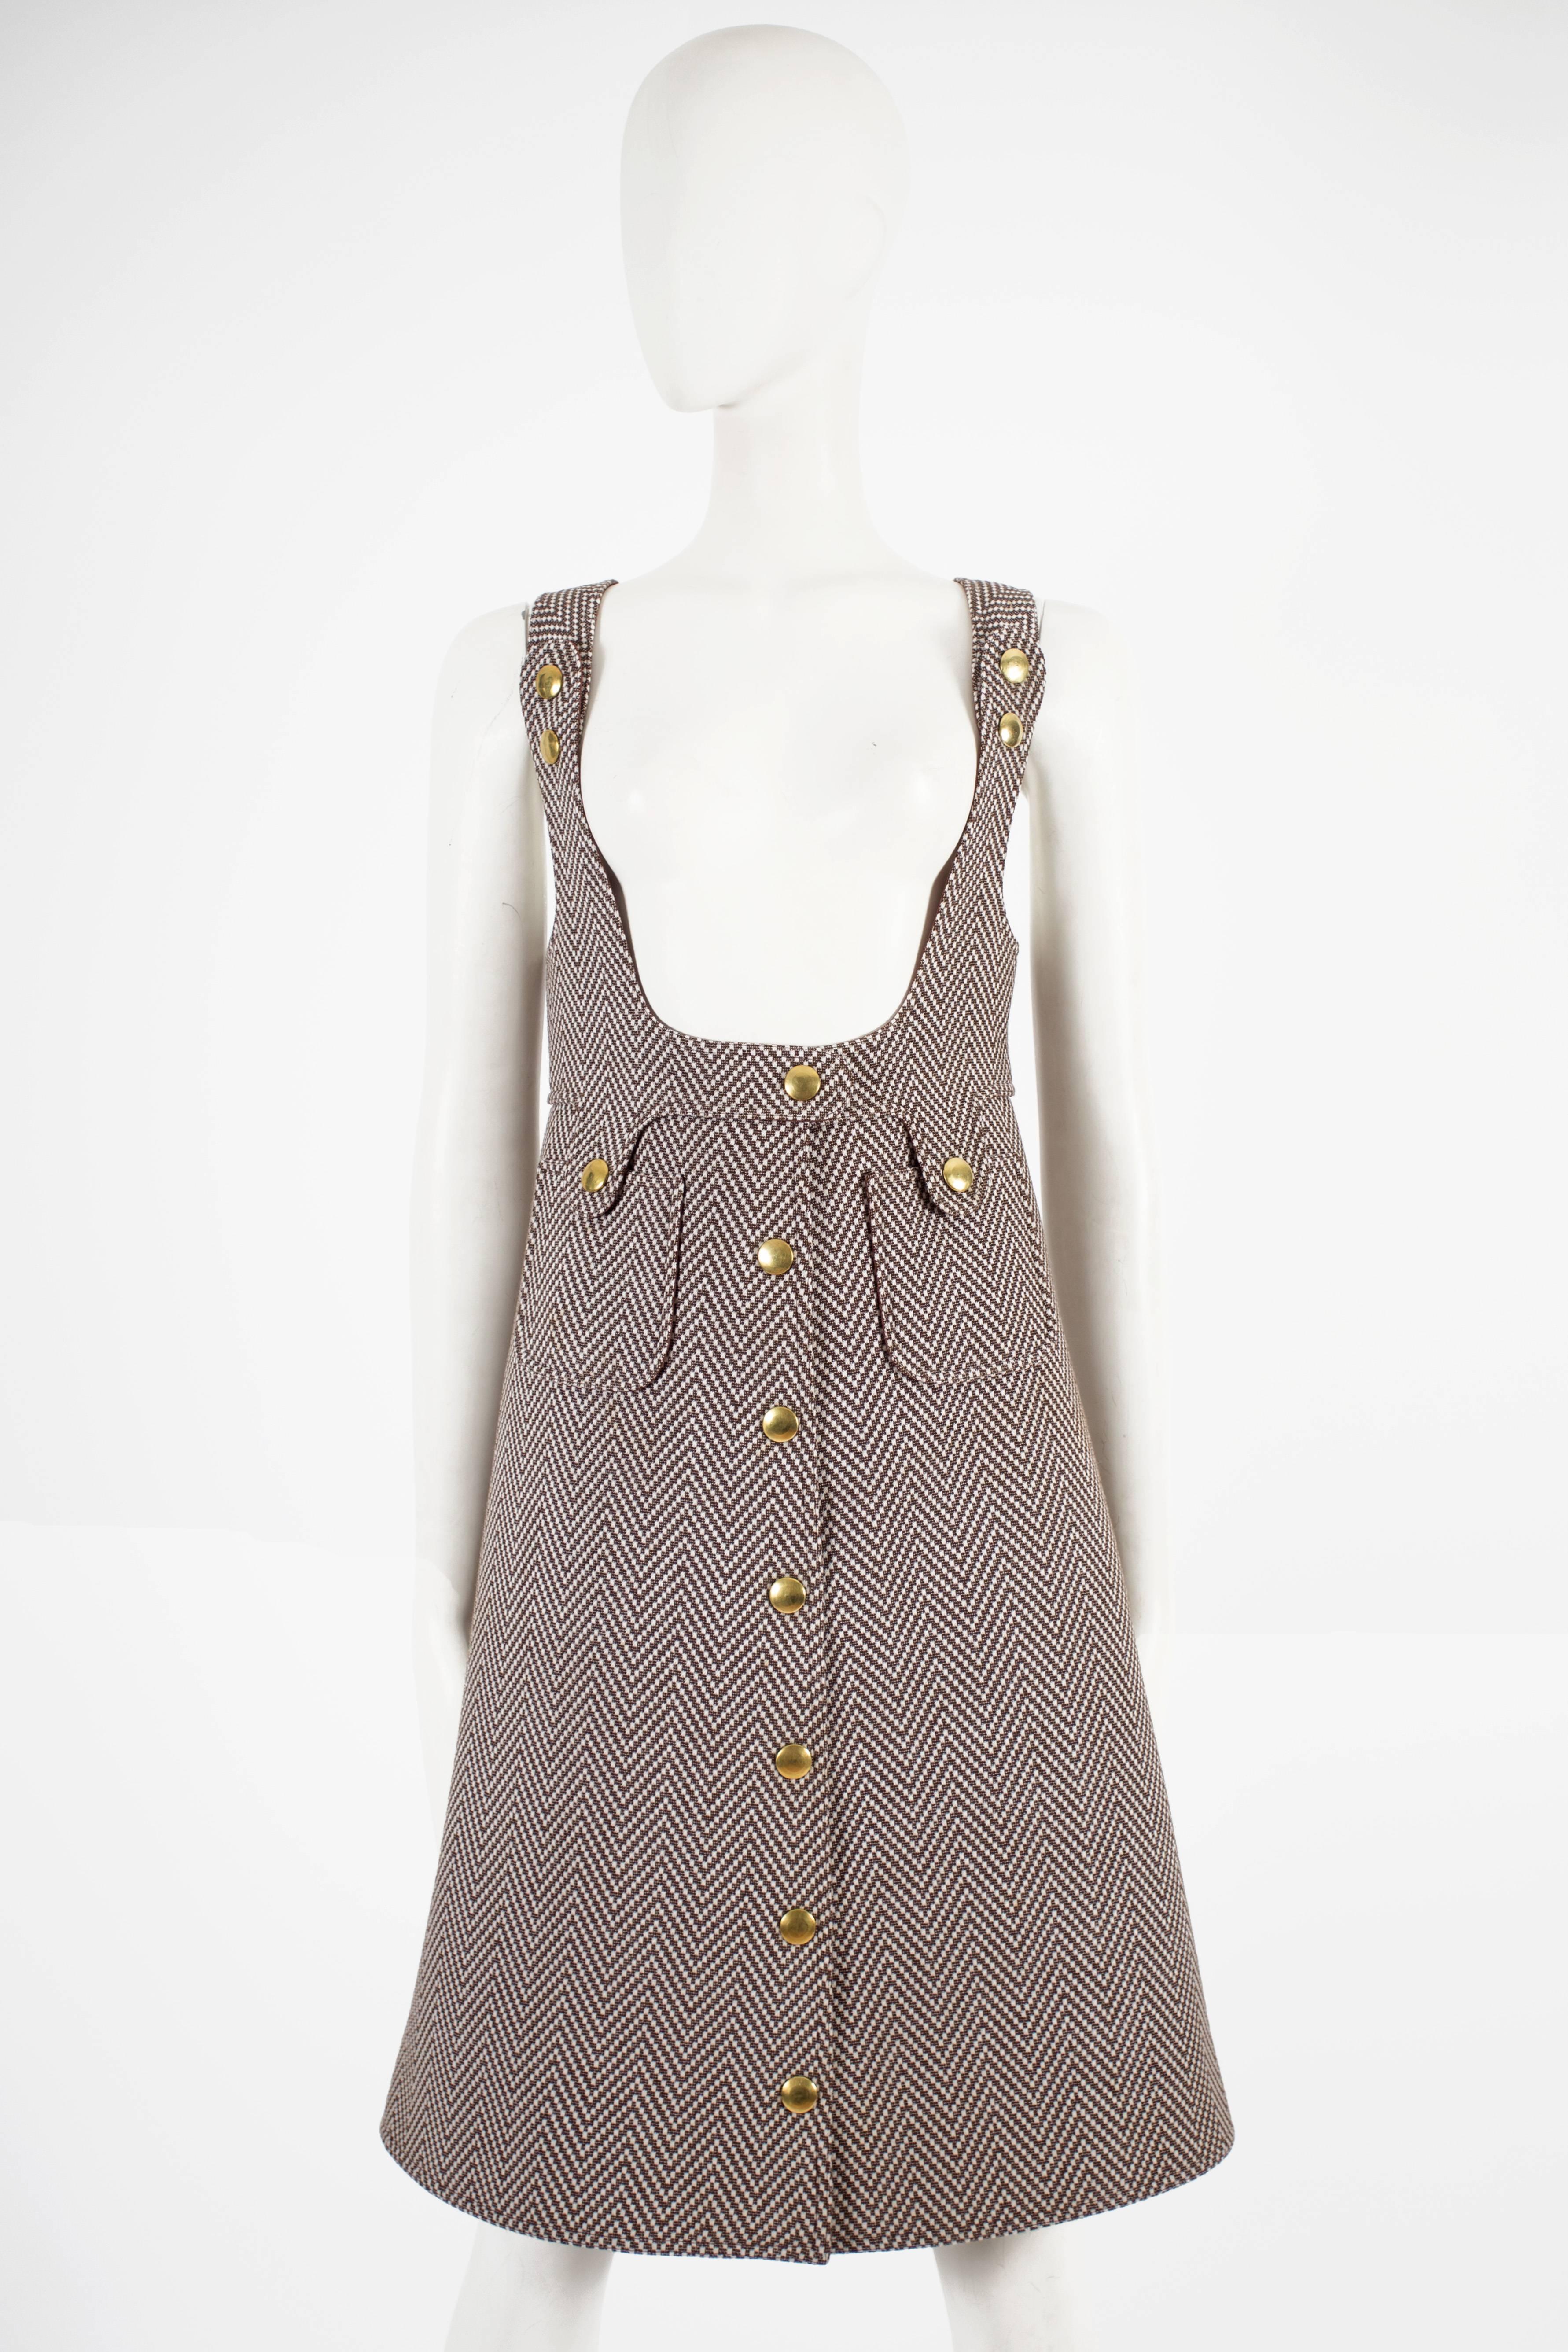 Courreges Haute Couture pinafore dress constructed in brown and ivory tweed, circa 1969. The dress features snap-button closures throughout, gold-tone stud buttons, open back, and brown silk lining.

